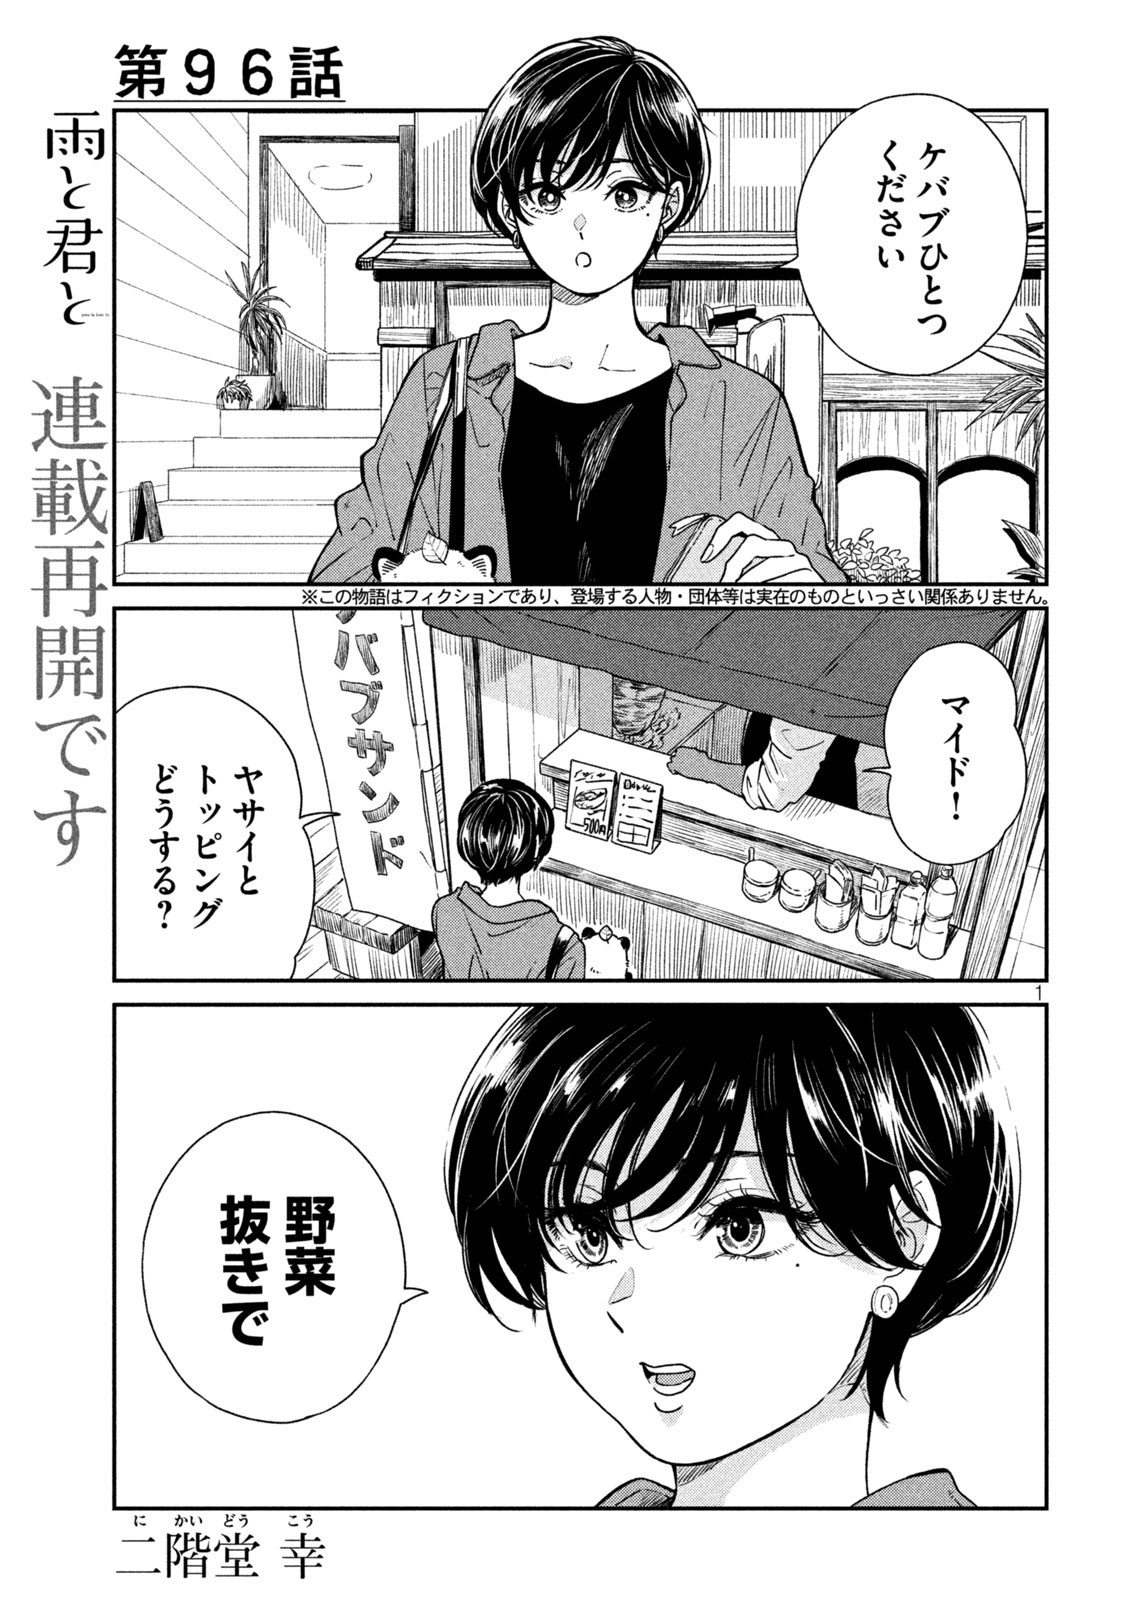 Ame to Kimi to - Chapter 96 - Page 1